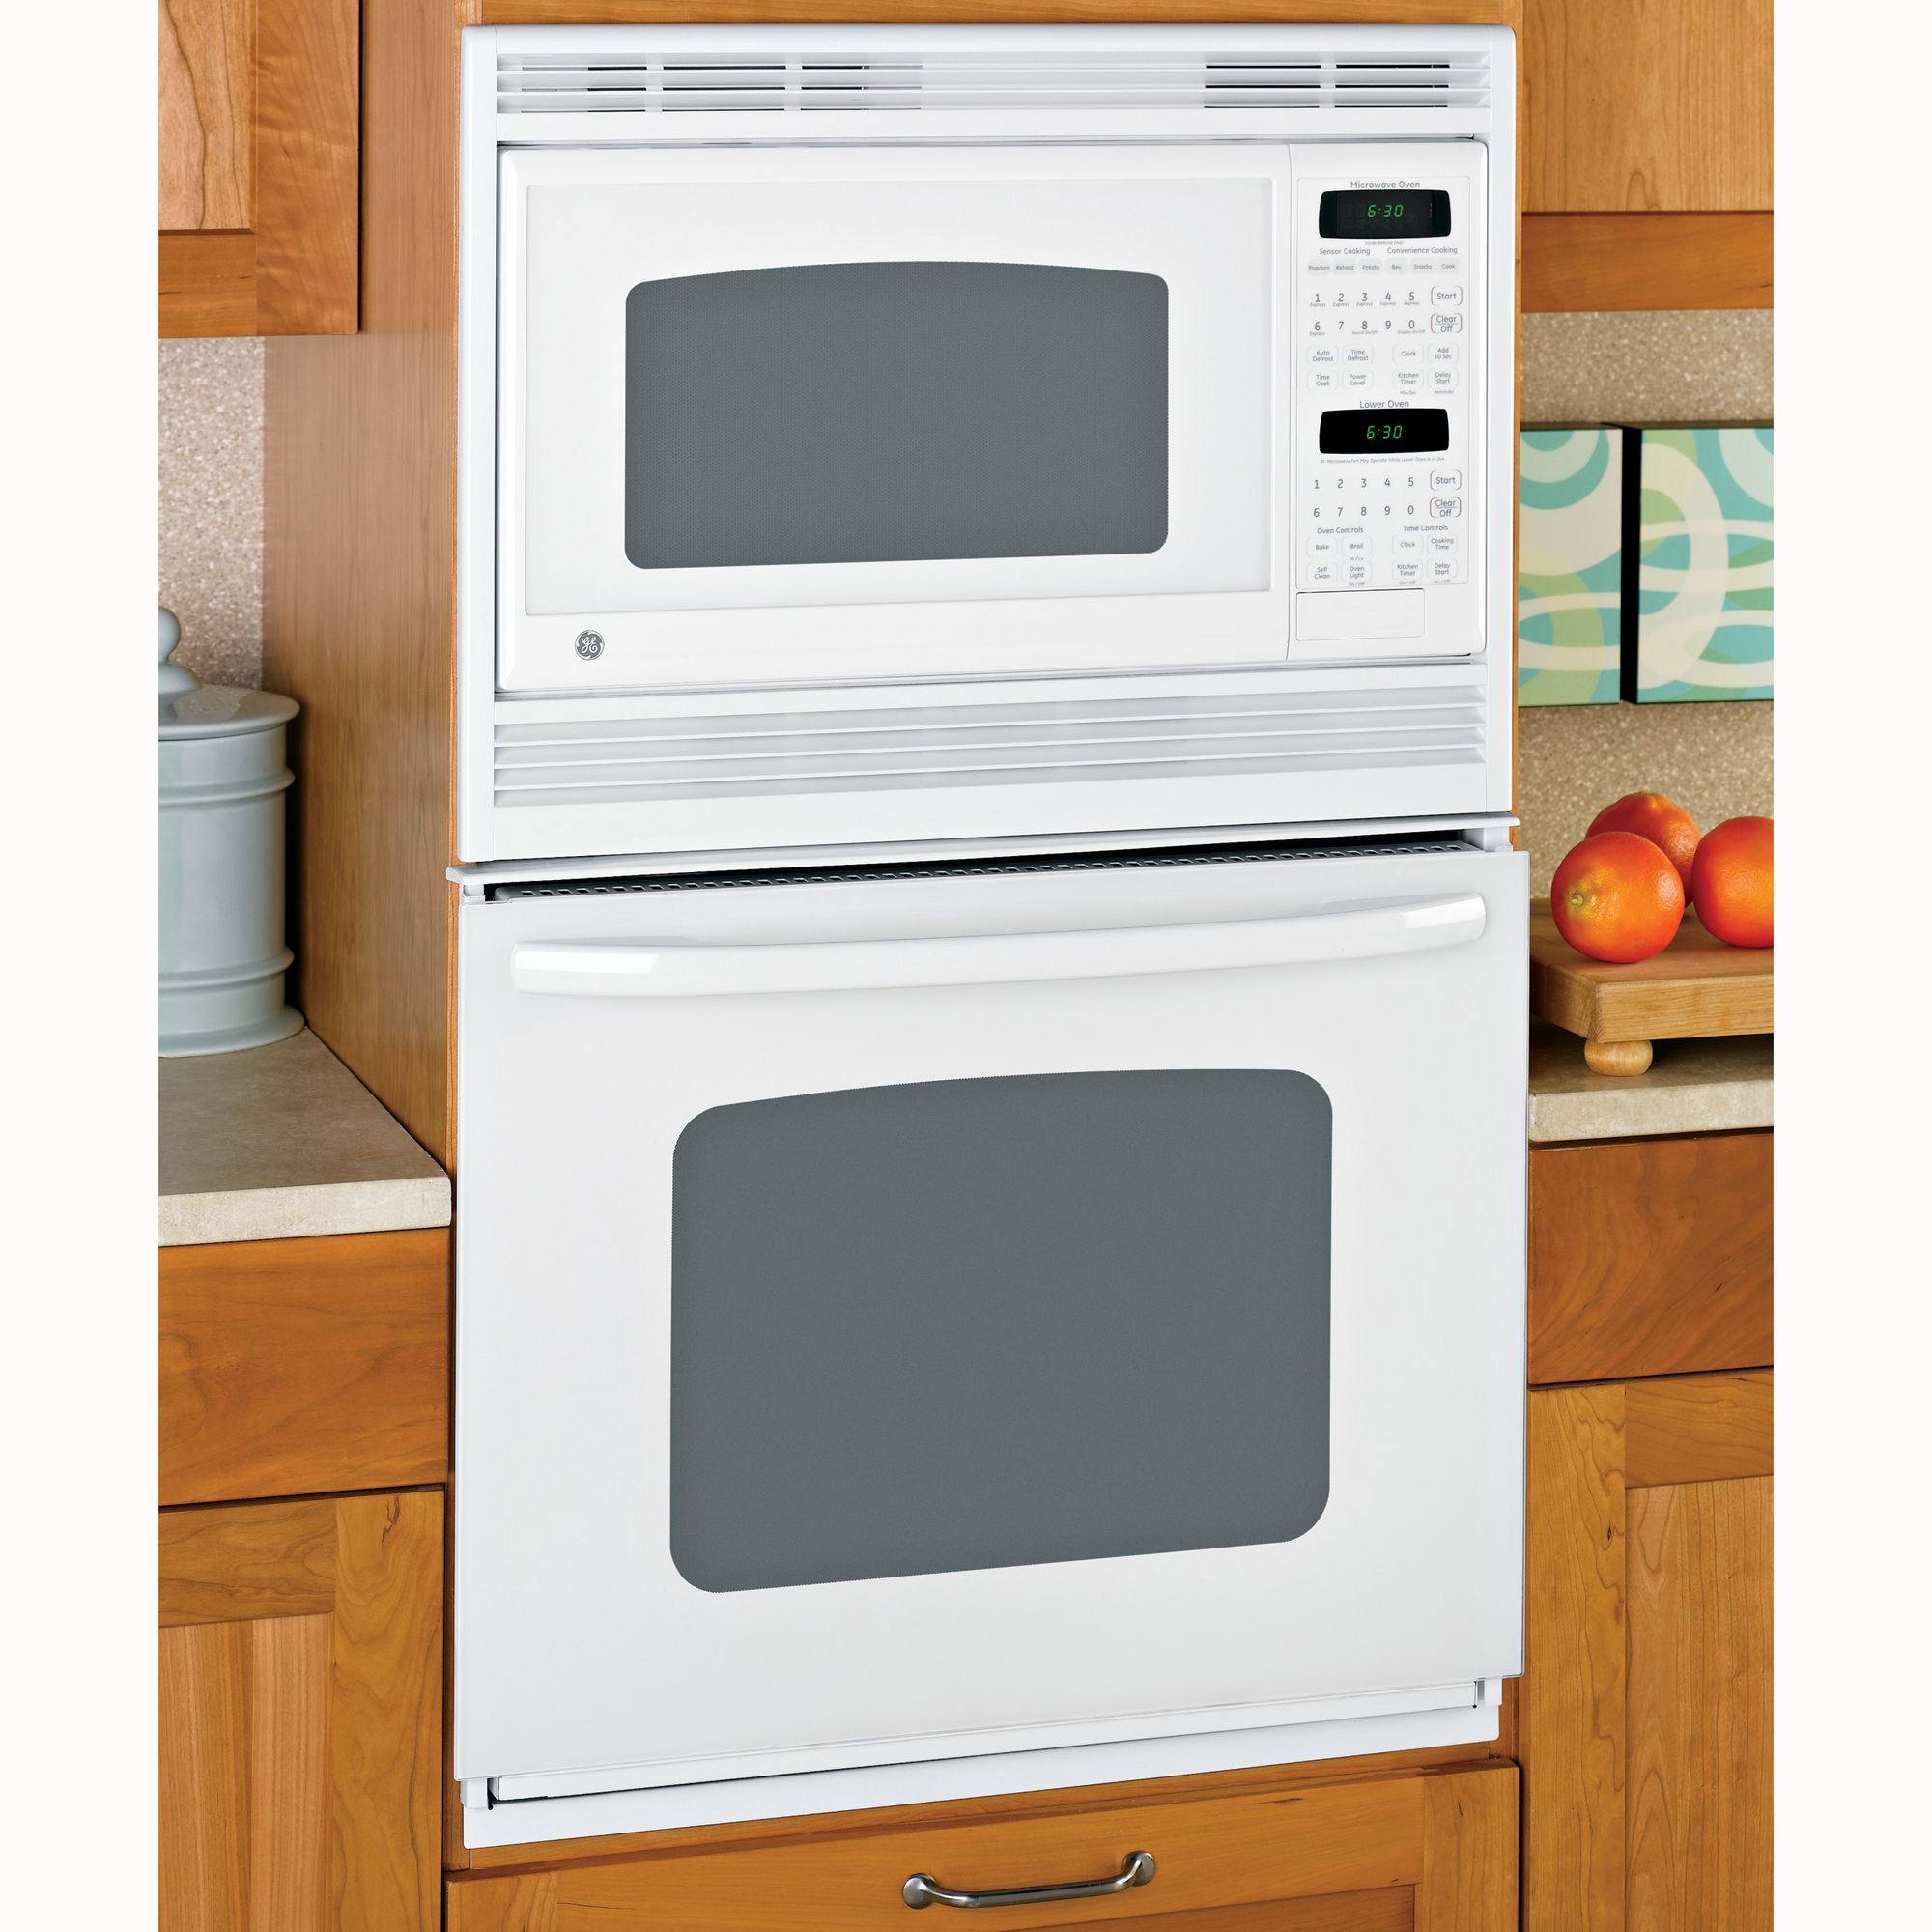 GE 27" Built-In Double Microwave/Wall Oven | Shop Your Way: Online